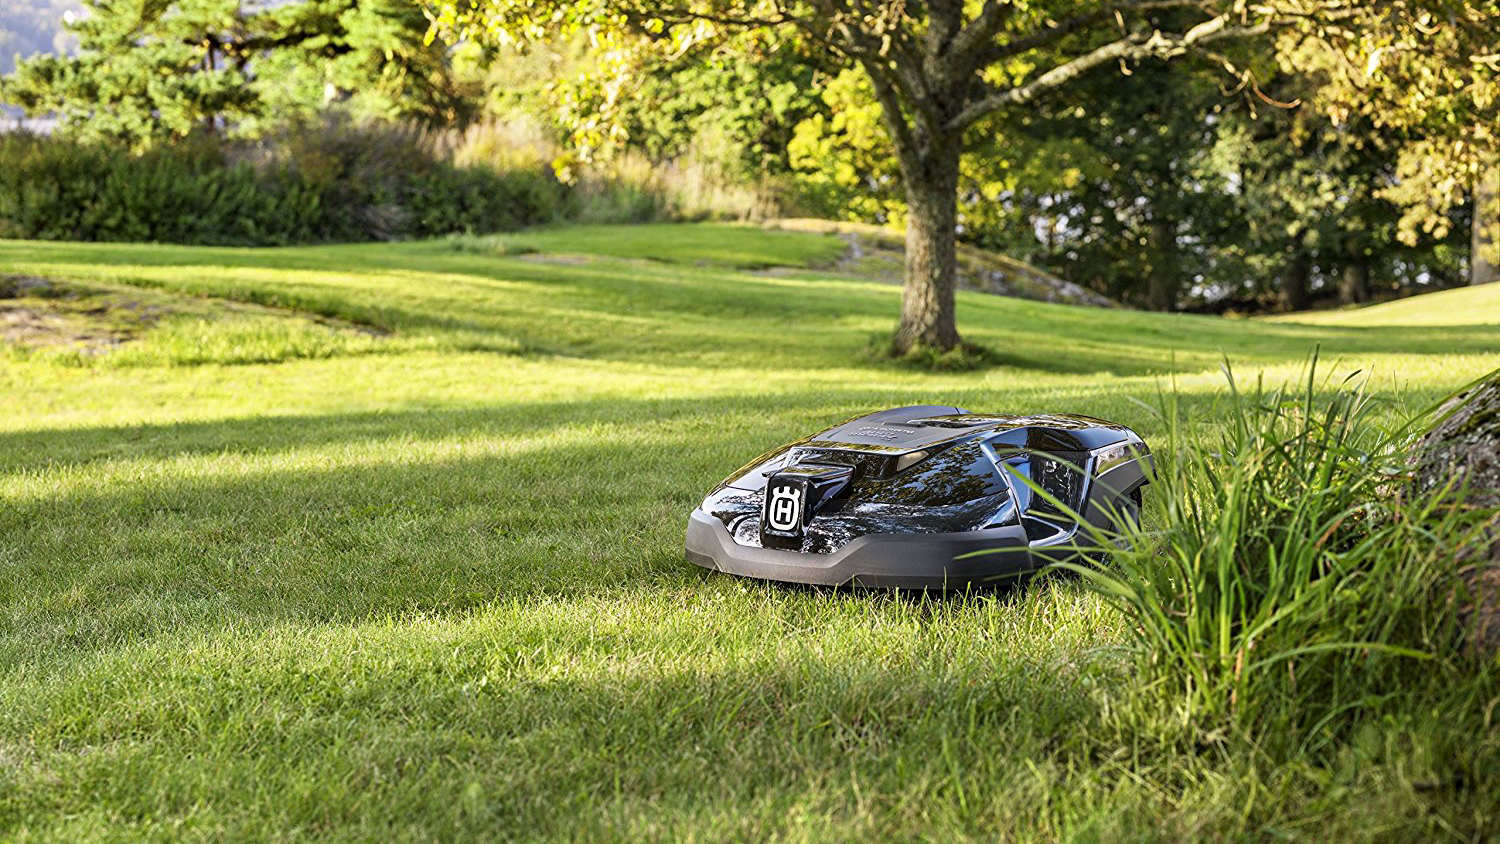 4 Heavy Duty Robotic Lawn Mowers for your lawn in 2022.